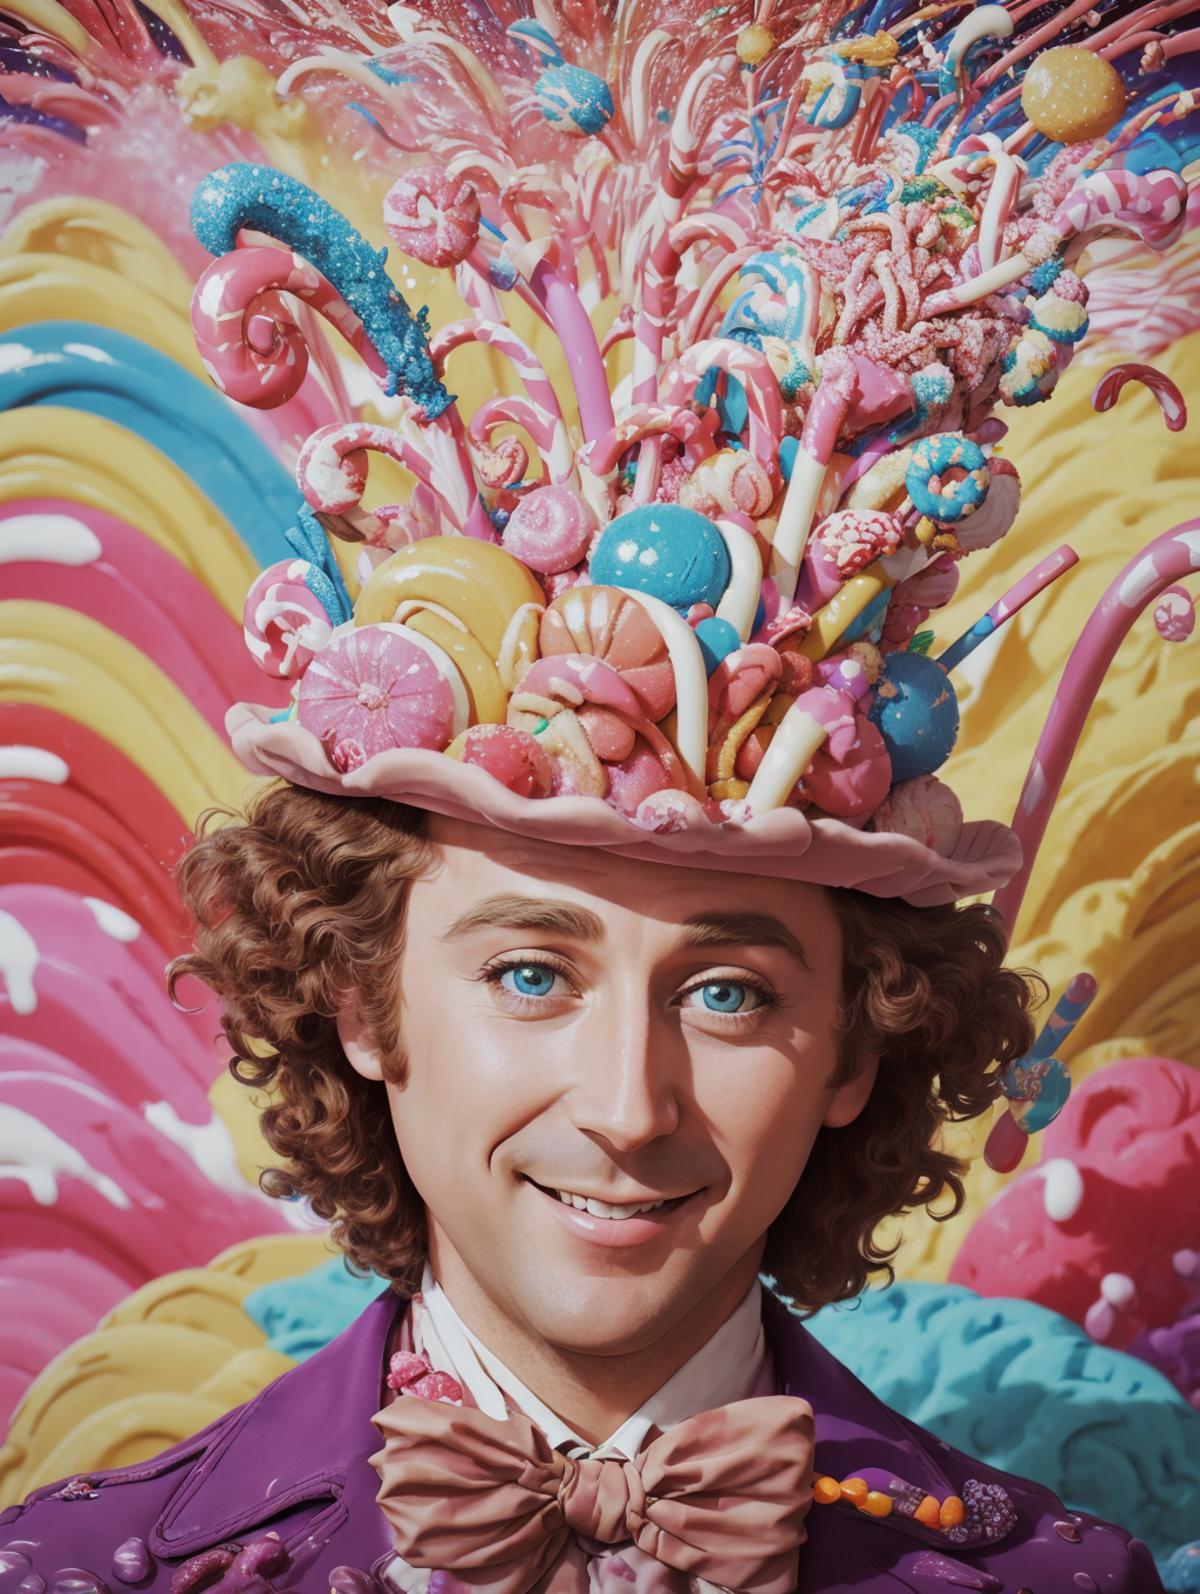 A colorful painting of a smiling man wearing a whimsical hat with candy canes on it.